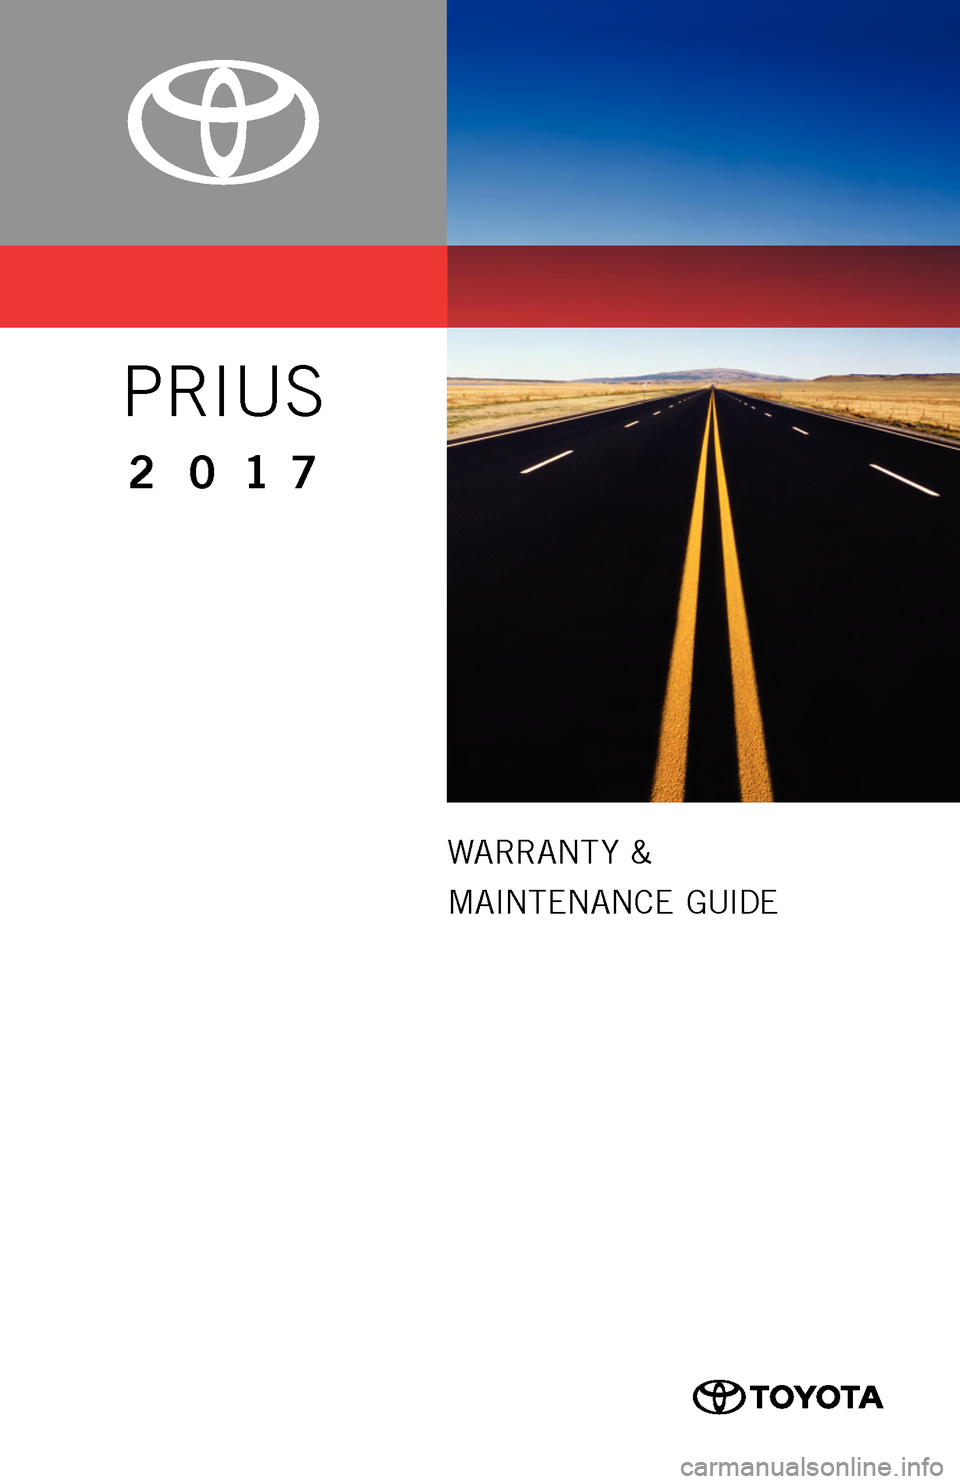 TOYOTA PRIUS 2017 4.G Warranty And Maintenance Guide WARRANT Y &
MAINTENANCE  GUIDE
0050517WMGPRI
PRIUS
2017
16-TCS-09410_WMG_Prius_2_0F_lm.indd   27/25/16   7:22 PM  